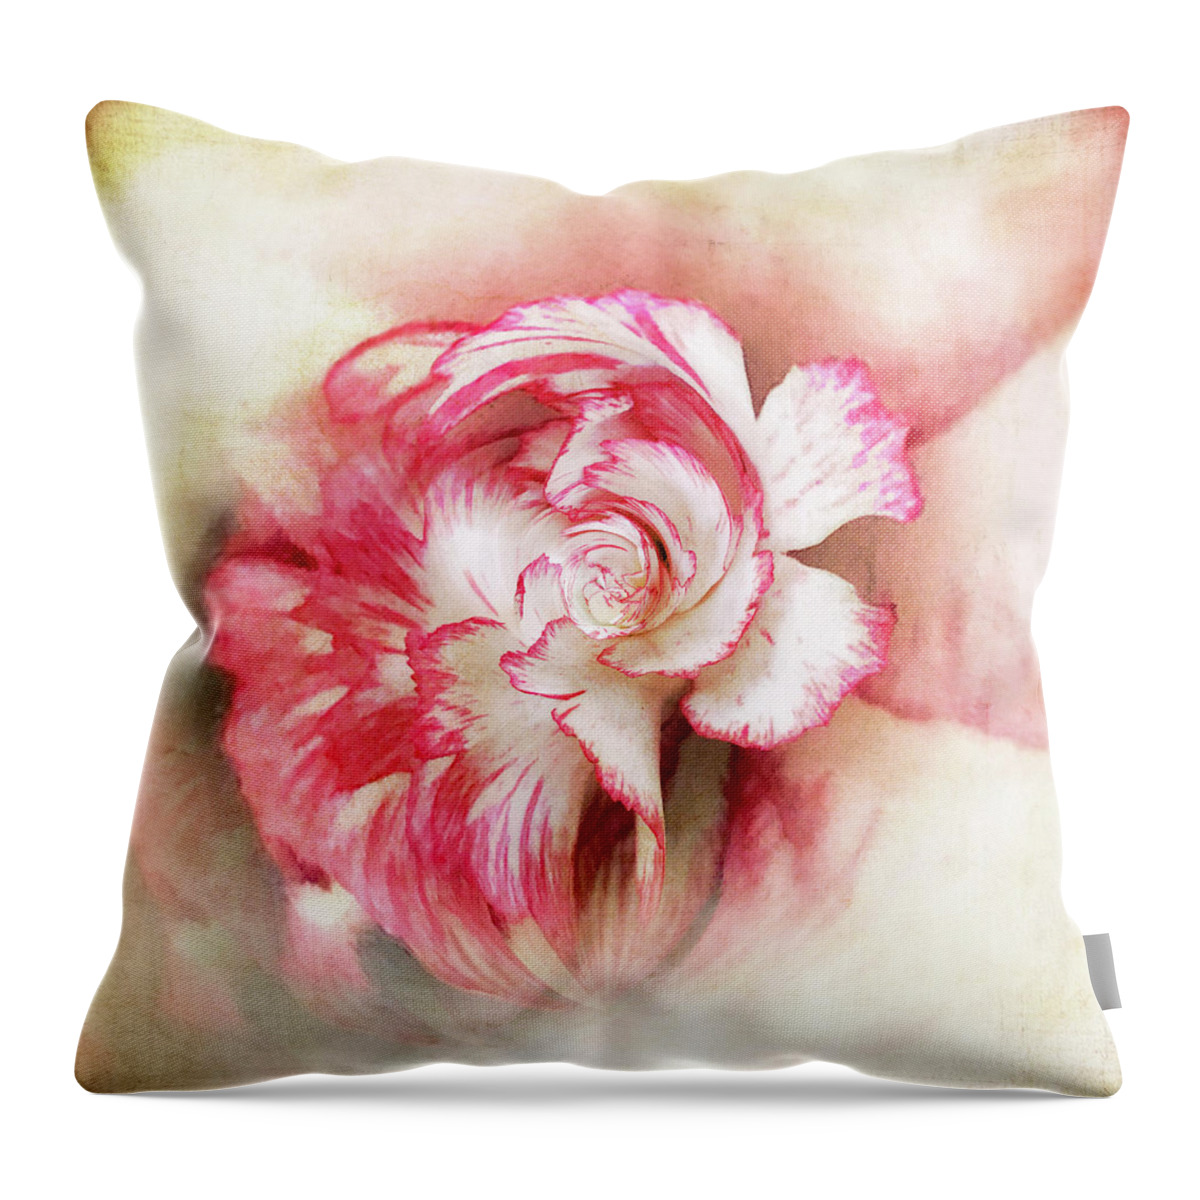 Floral Art Throw Pillow featuring the photograph Floral Fantasy 2 by Usha Peddamatham